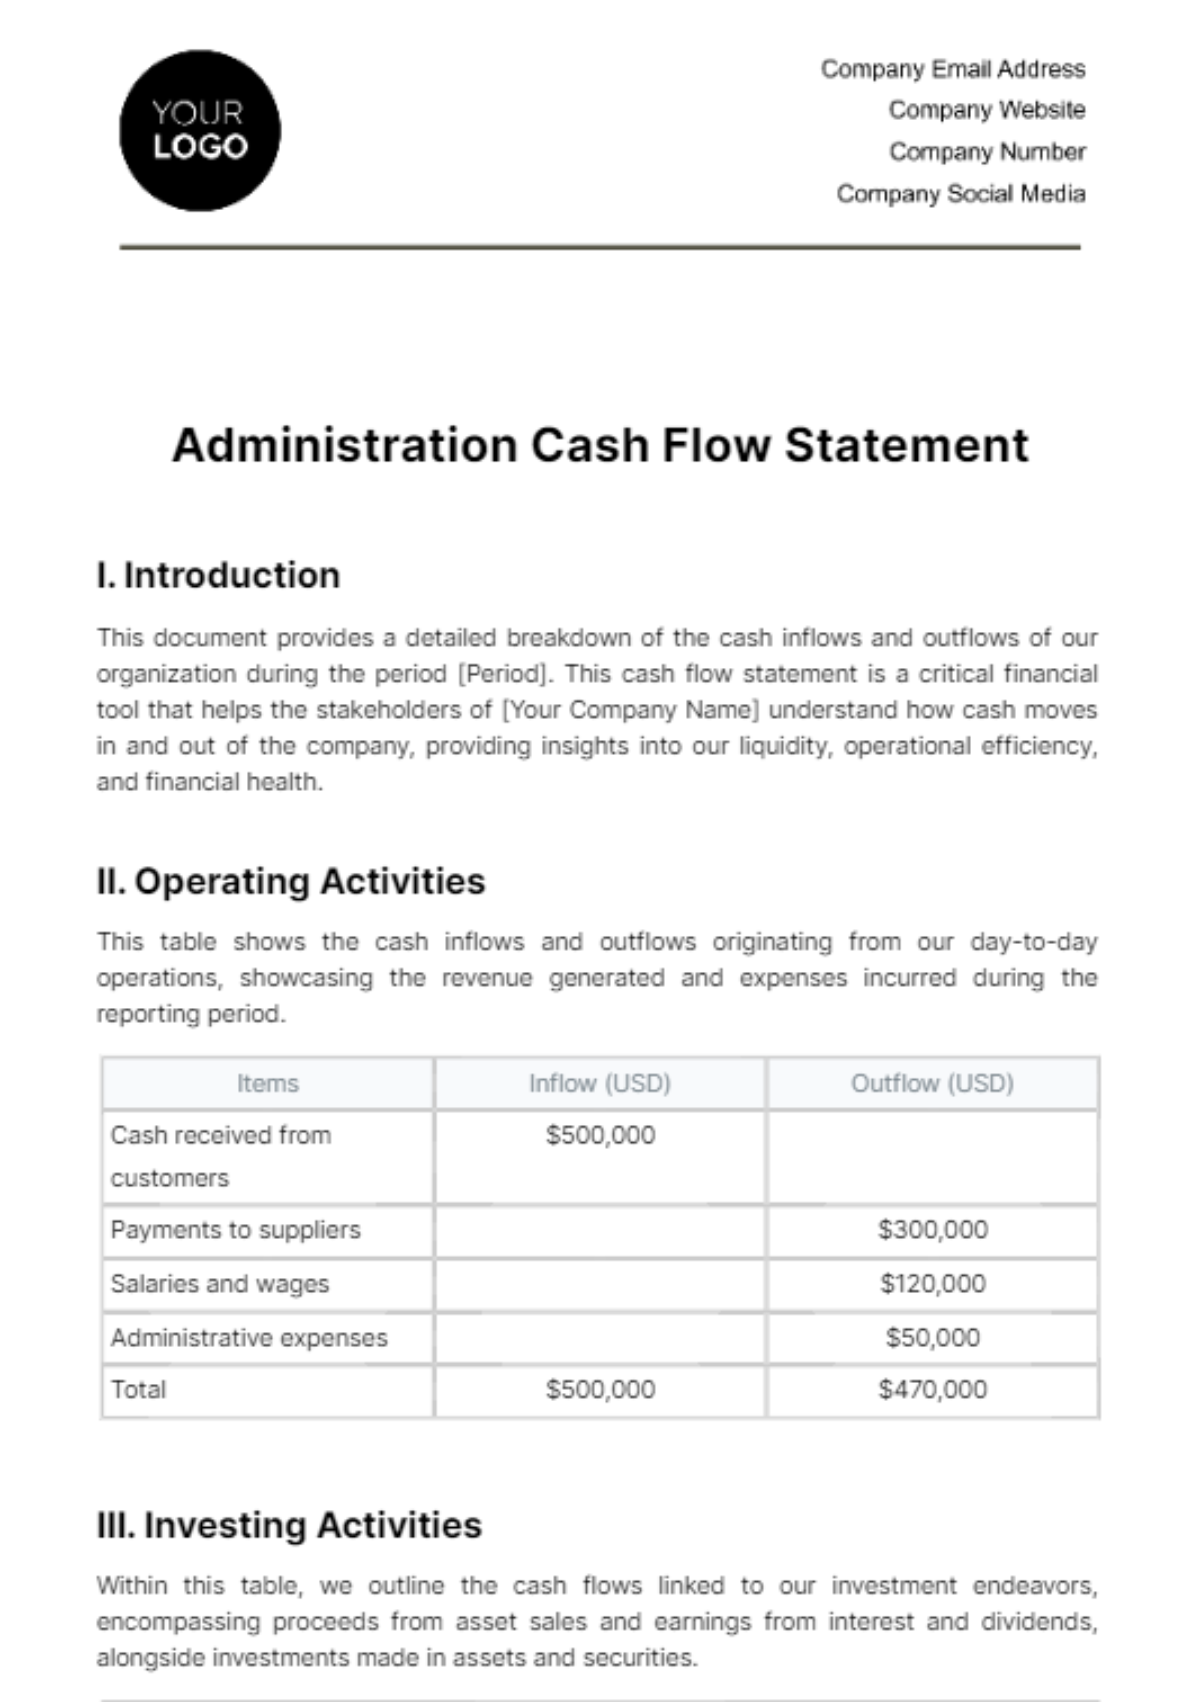 Free Administration Cash Flow Statement Template